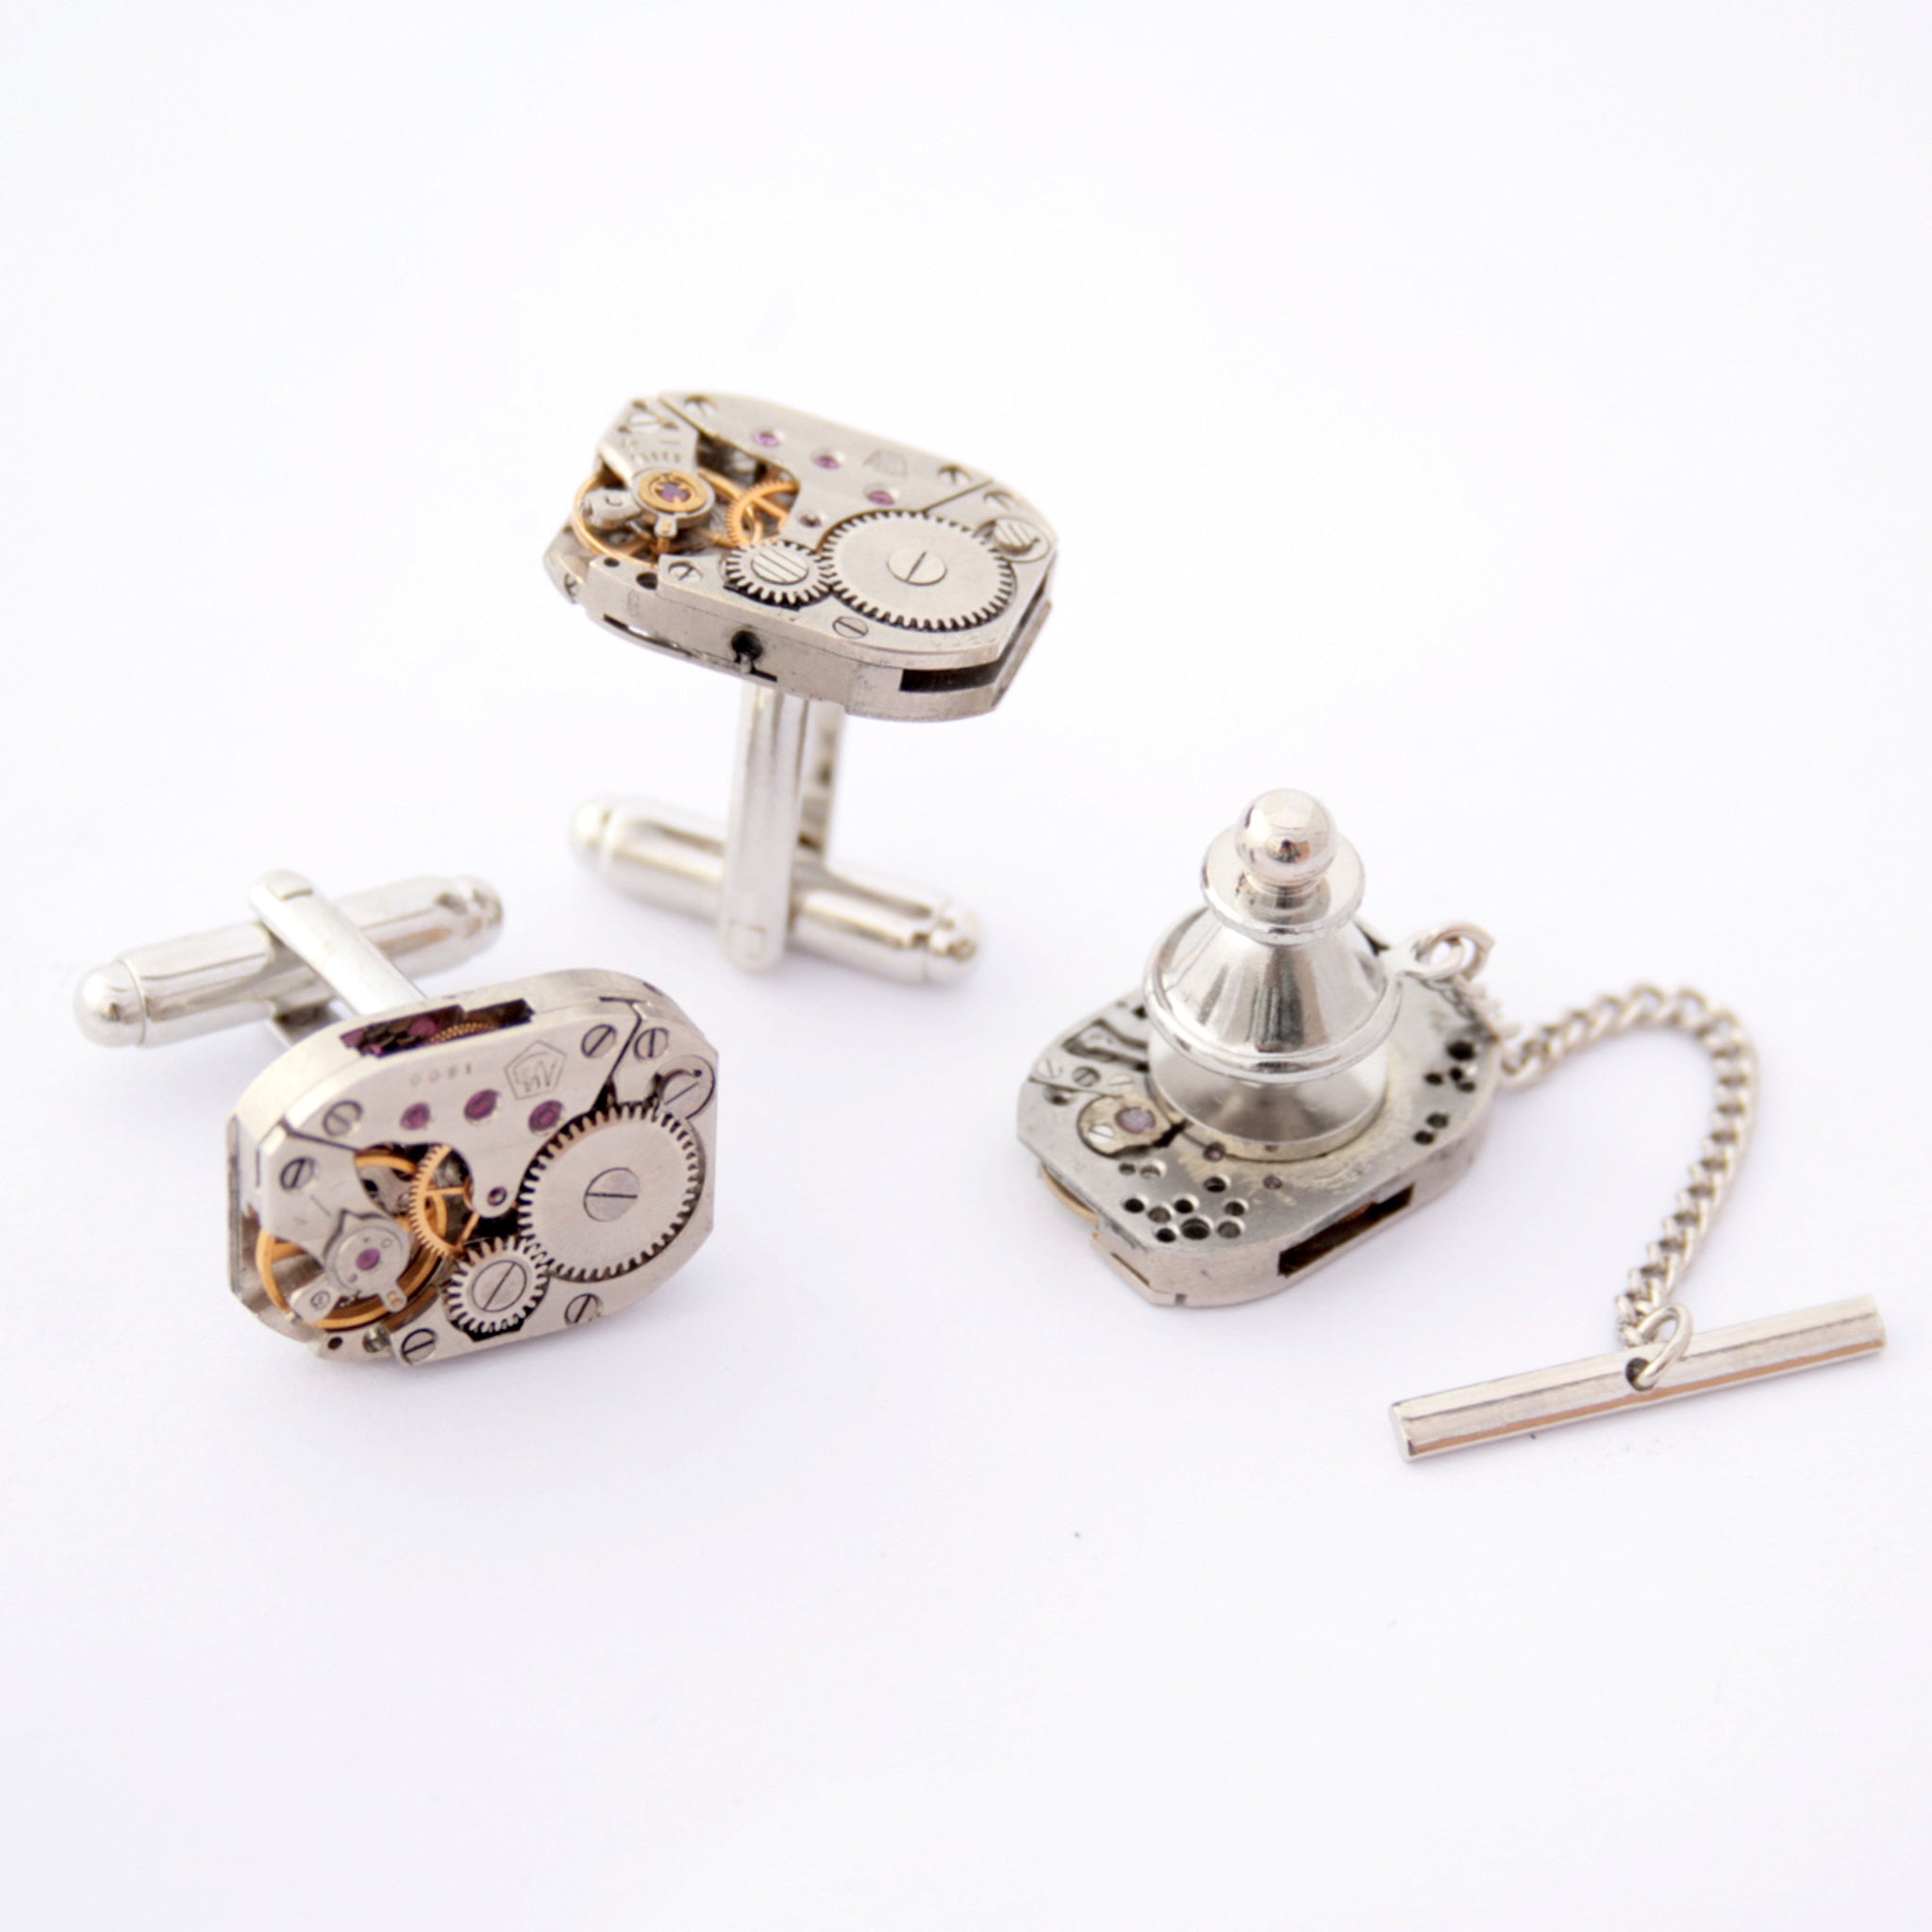 Steampunk Tie Tack and Cufflinks Set made of watch movements